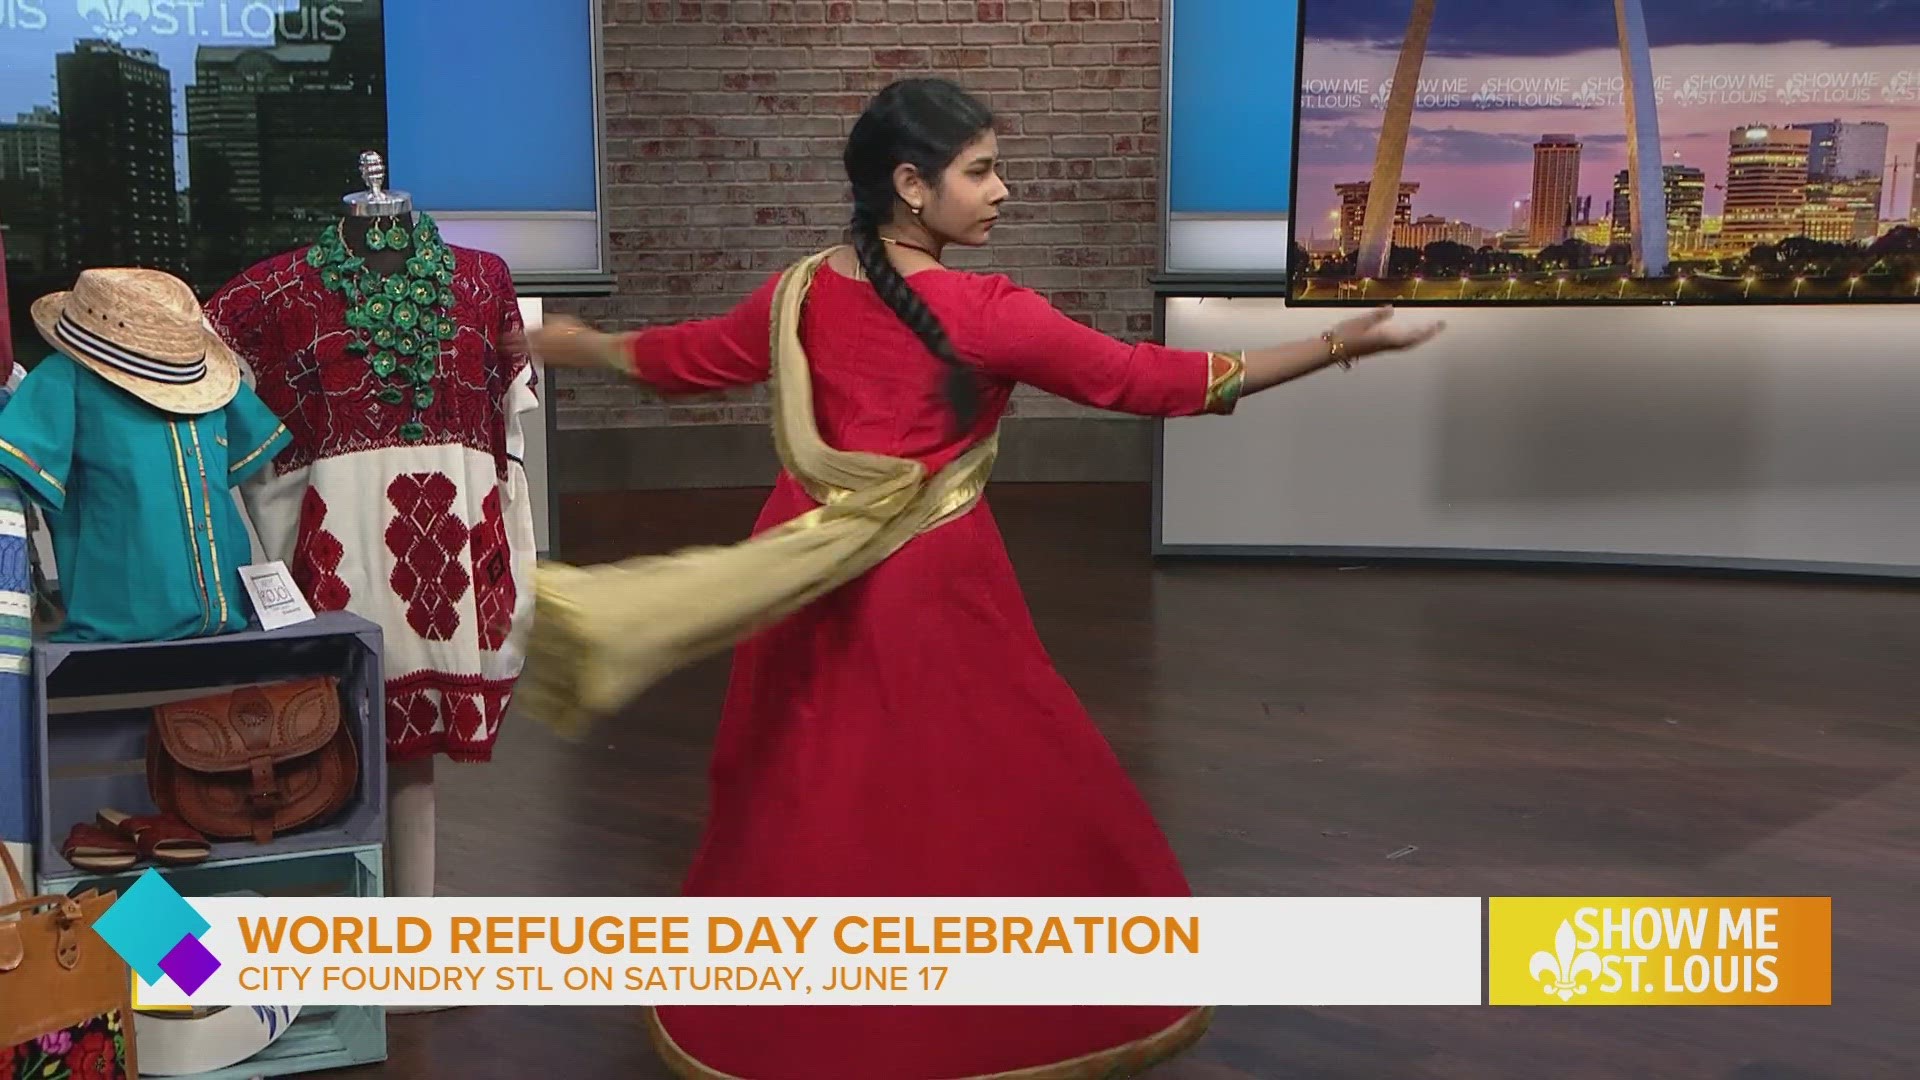 World Refugee Day is June 20th, and the International Institute of St. Louis is celebrating with a full-day event at the City Foundry this Saturday.